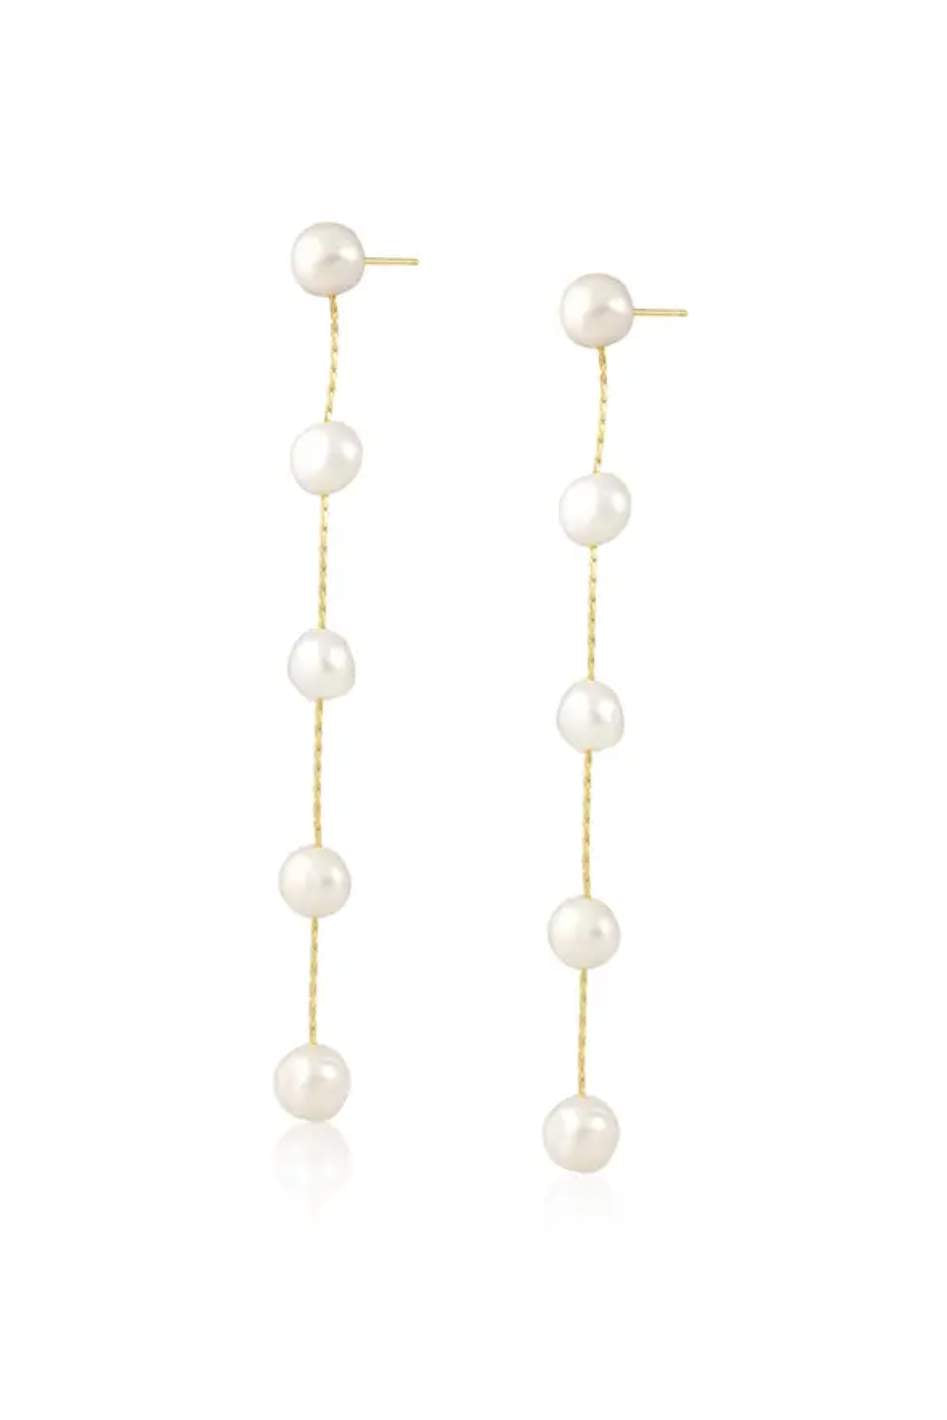 Valentina Pearl Drop Earrings - Expressive Collective CO.